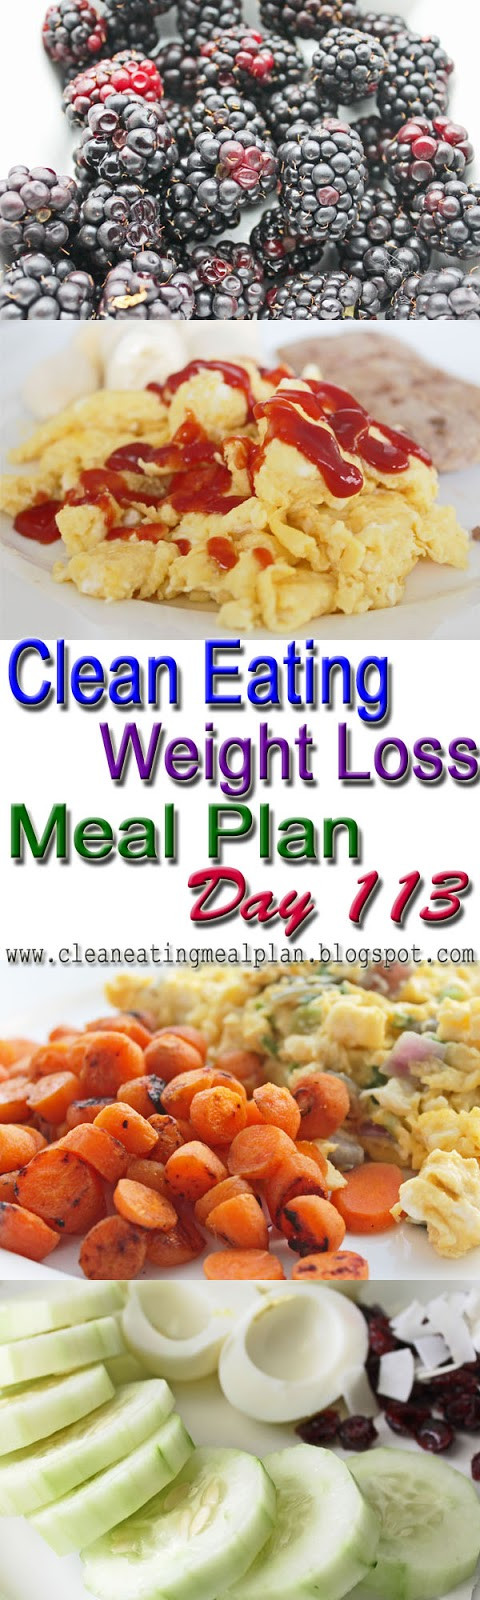 Clean Eating Weight Loss Plan
 Clean Eating Weight Loss Meal Plan 113